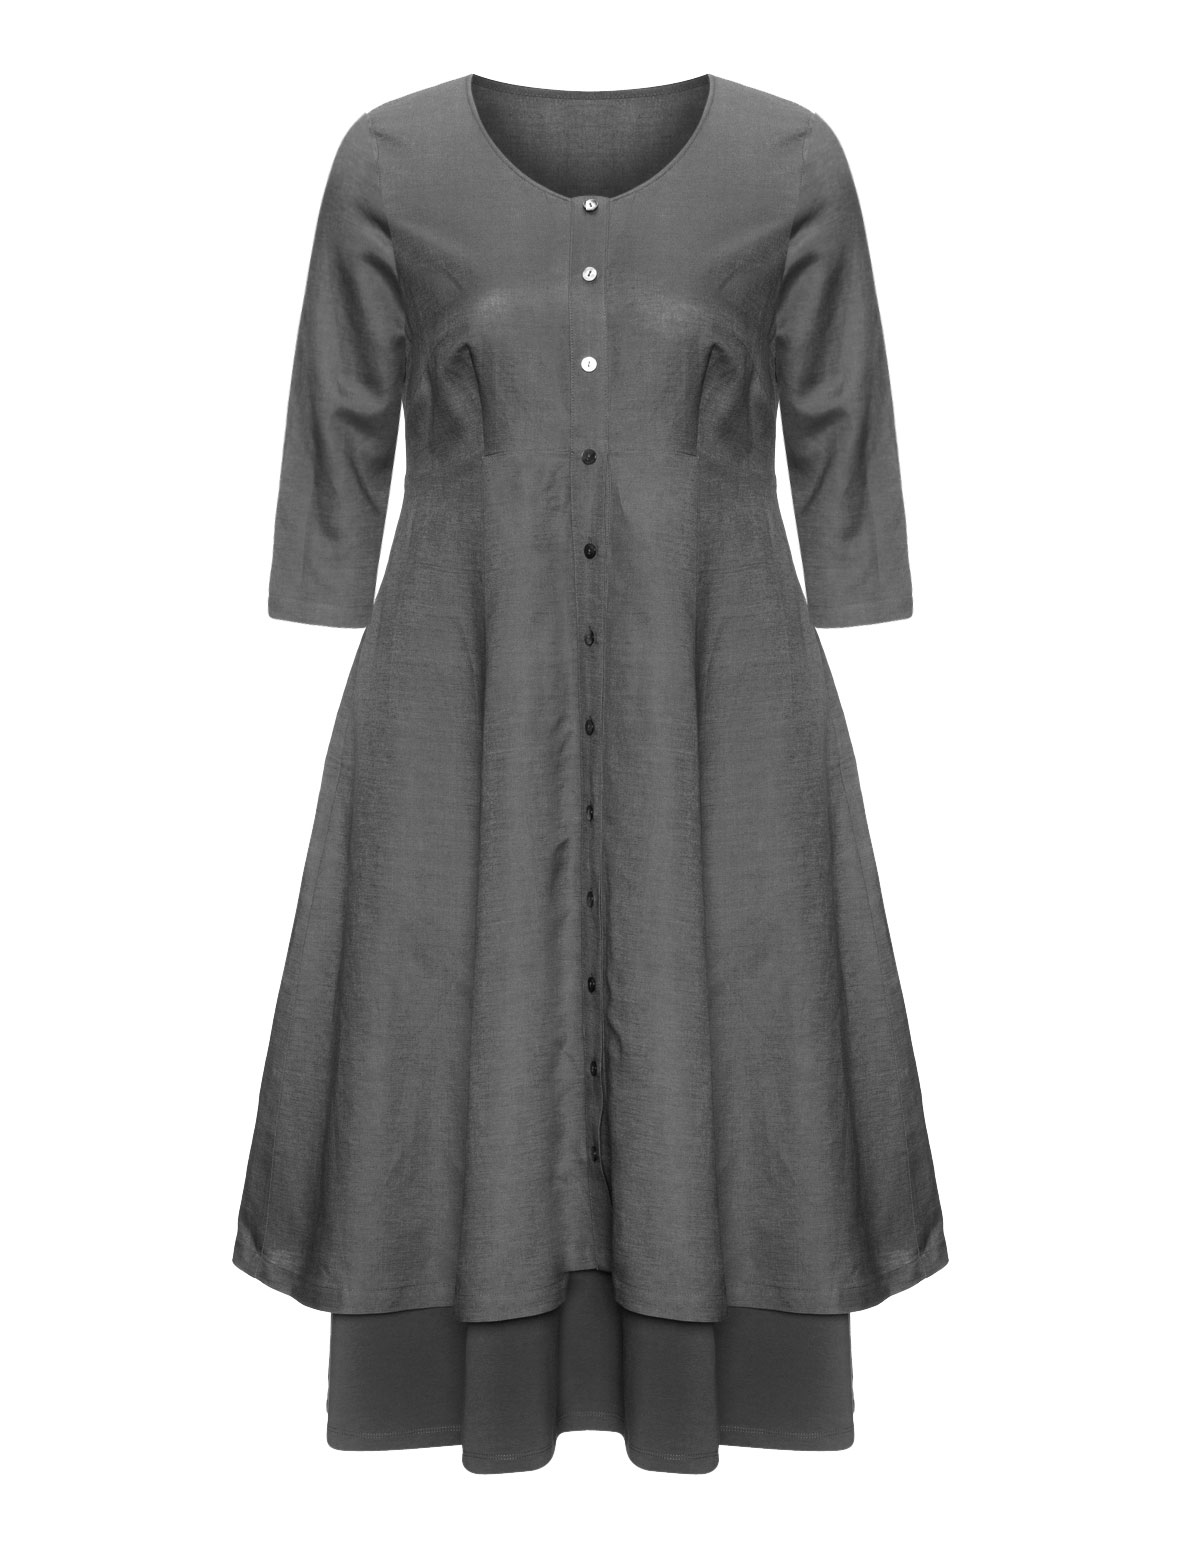 Linen cotton dress by
Isolde Roth